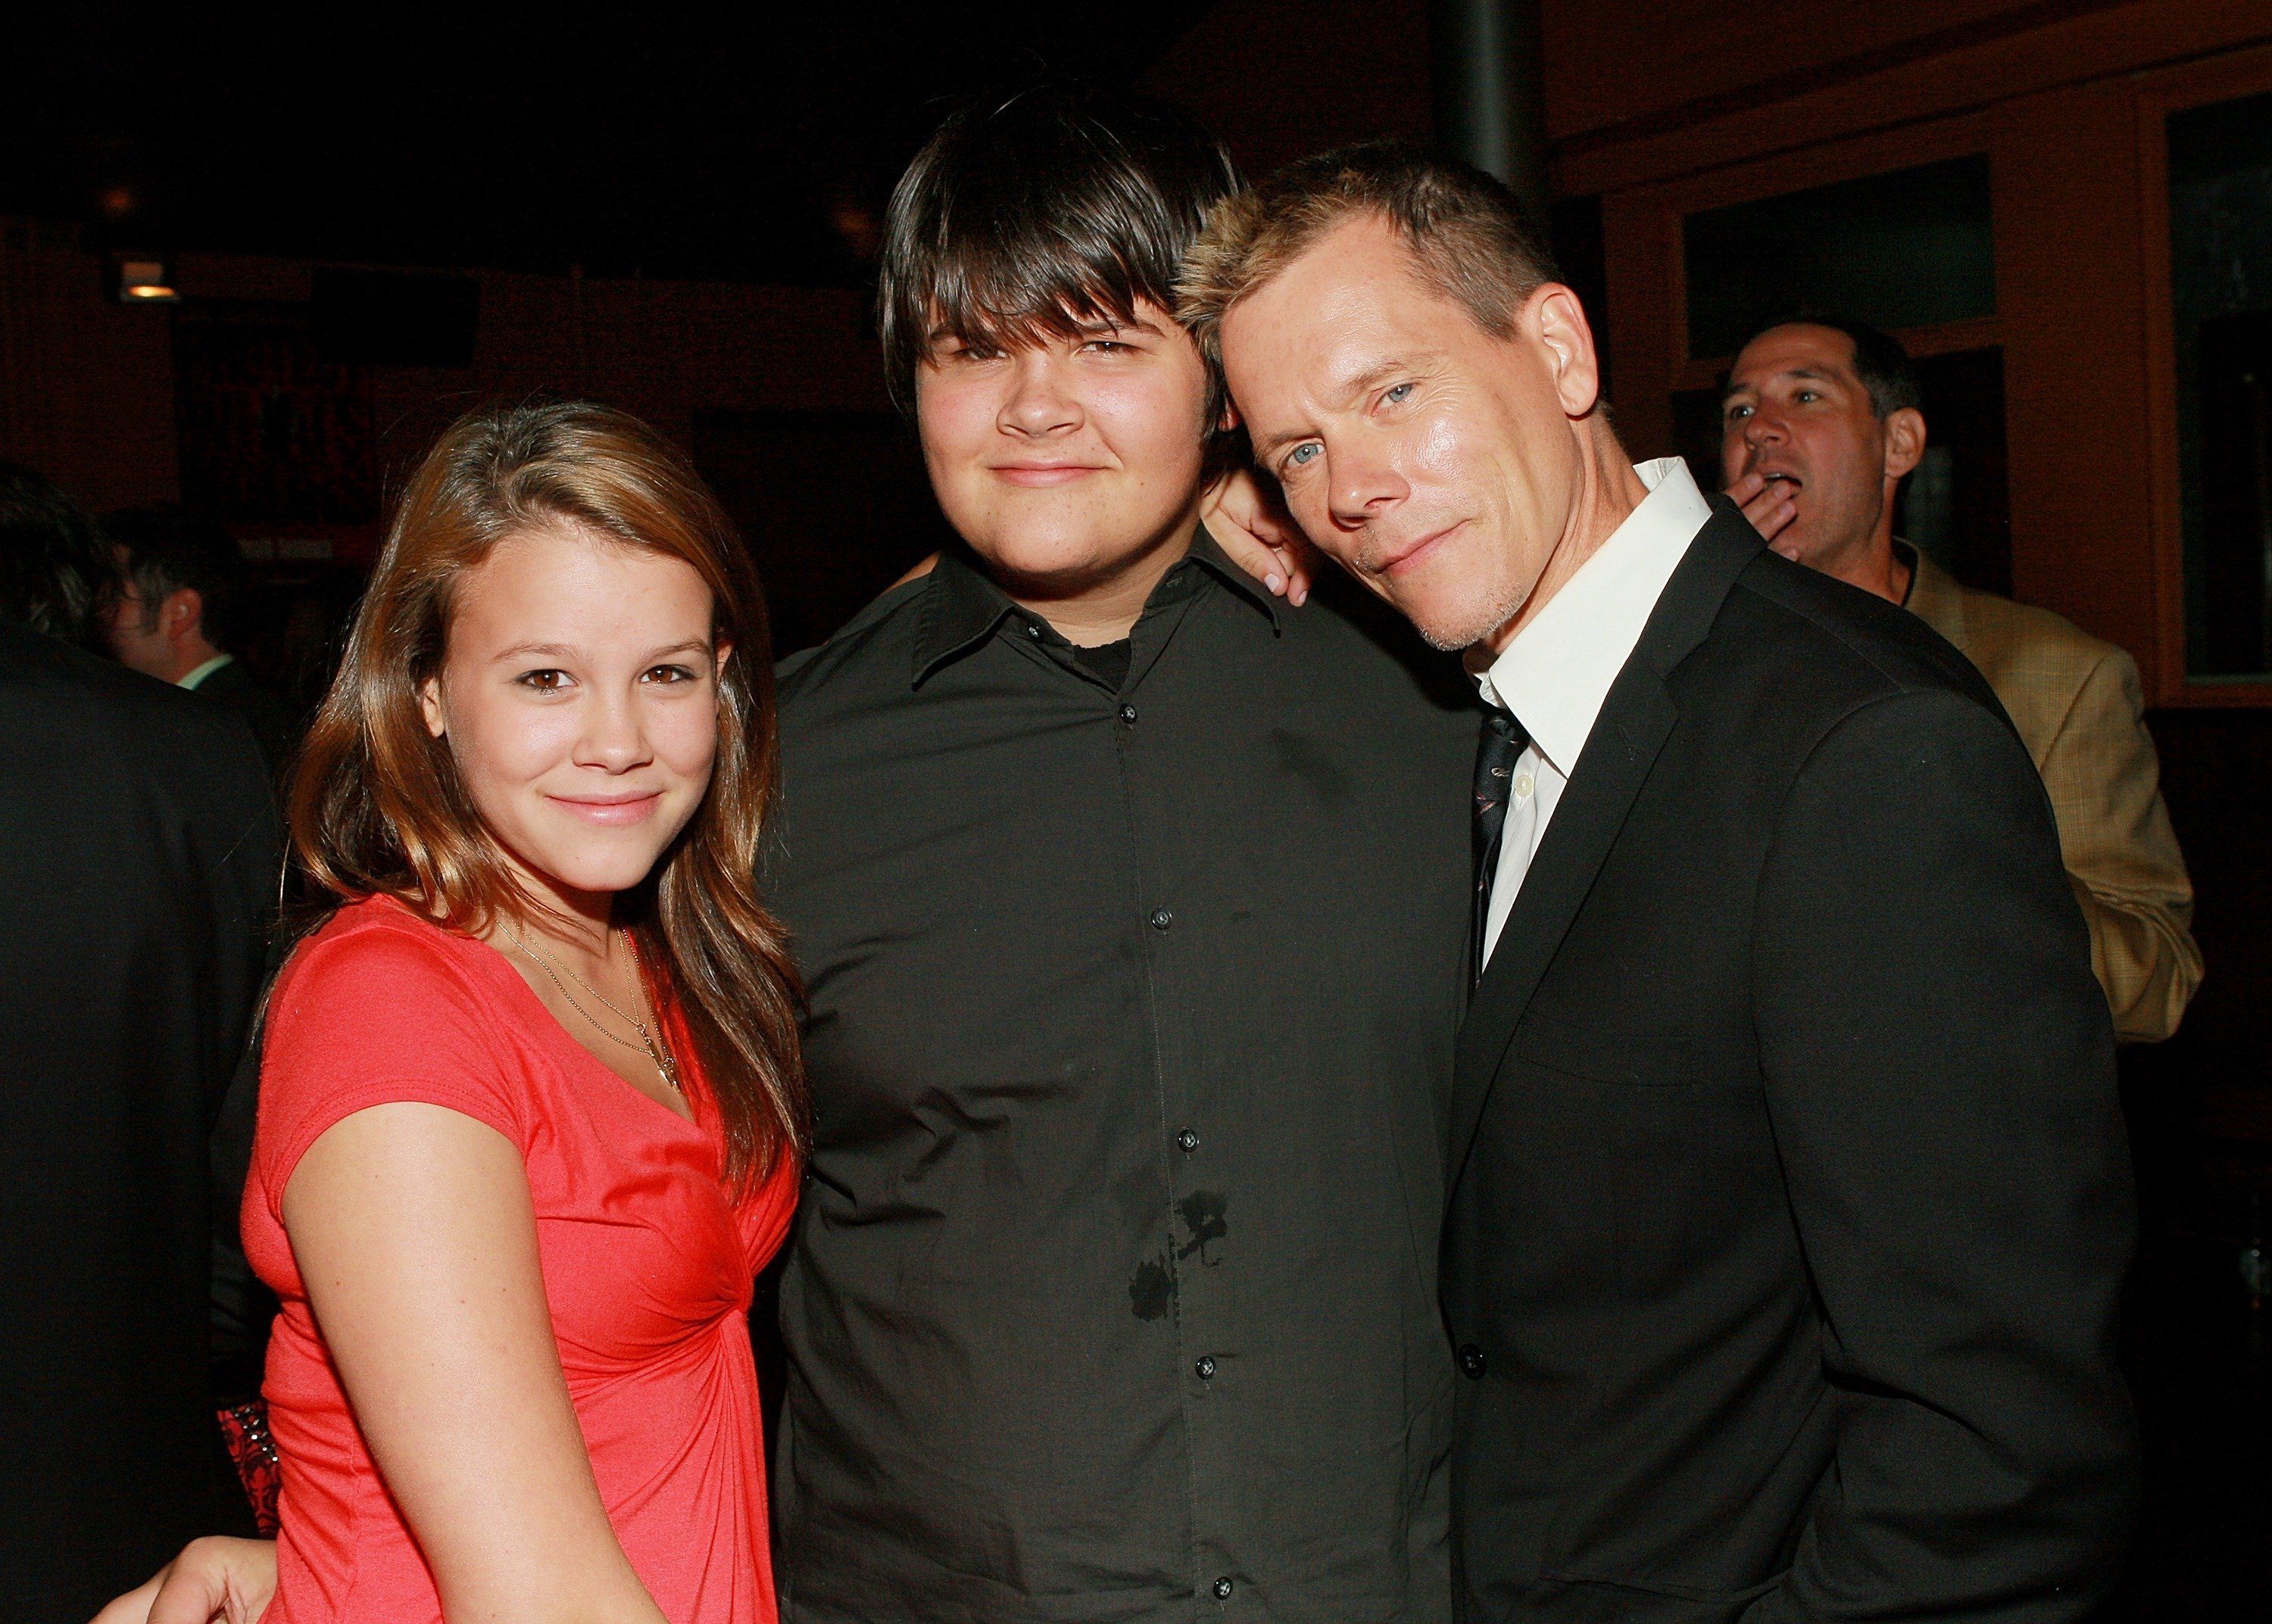 Sosie Bacon, Travis Bacon, and father Kevin Bacon attend the after party for the "Death Sentence" premiere in New York City on August 28, 2007 | Photo: Getty Images